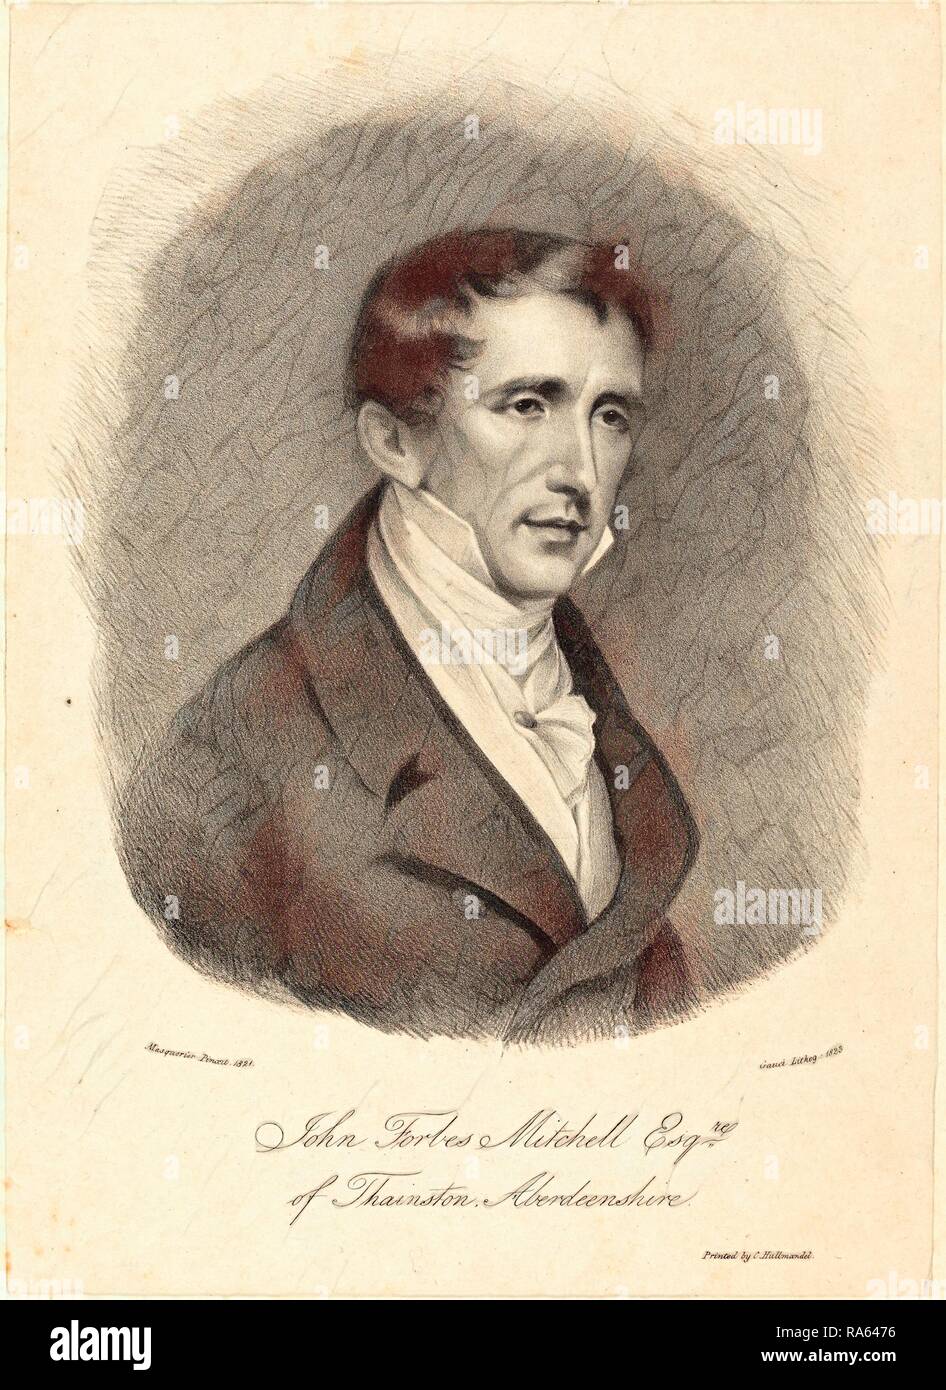 M. Gauci after John James Masquerier (British (?), active c. 1810-1846), John Forbes Mitchell, 1823, lithograph on reimagined Stock Photo